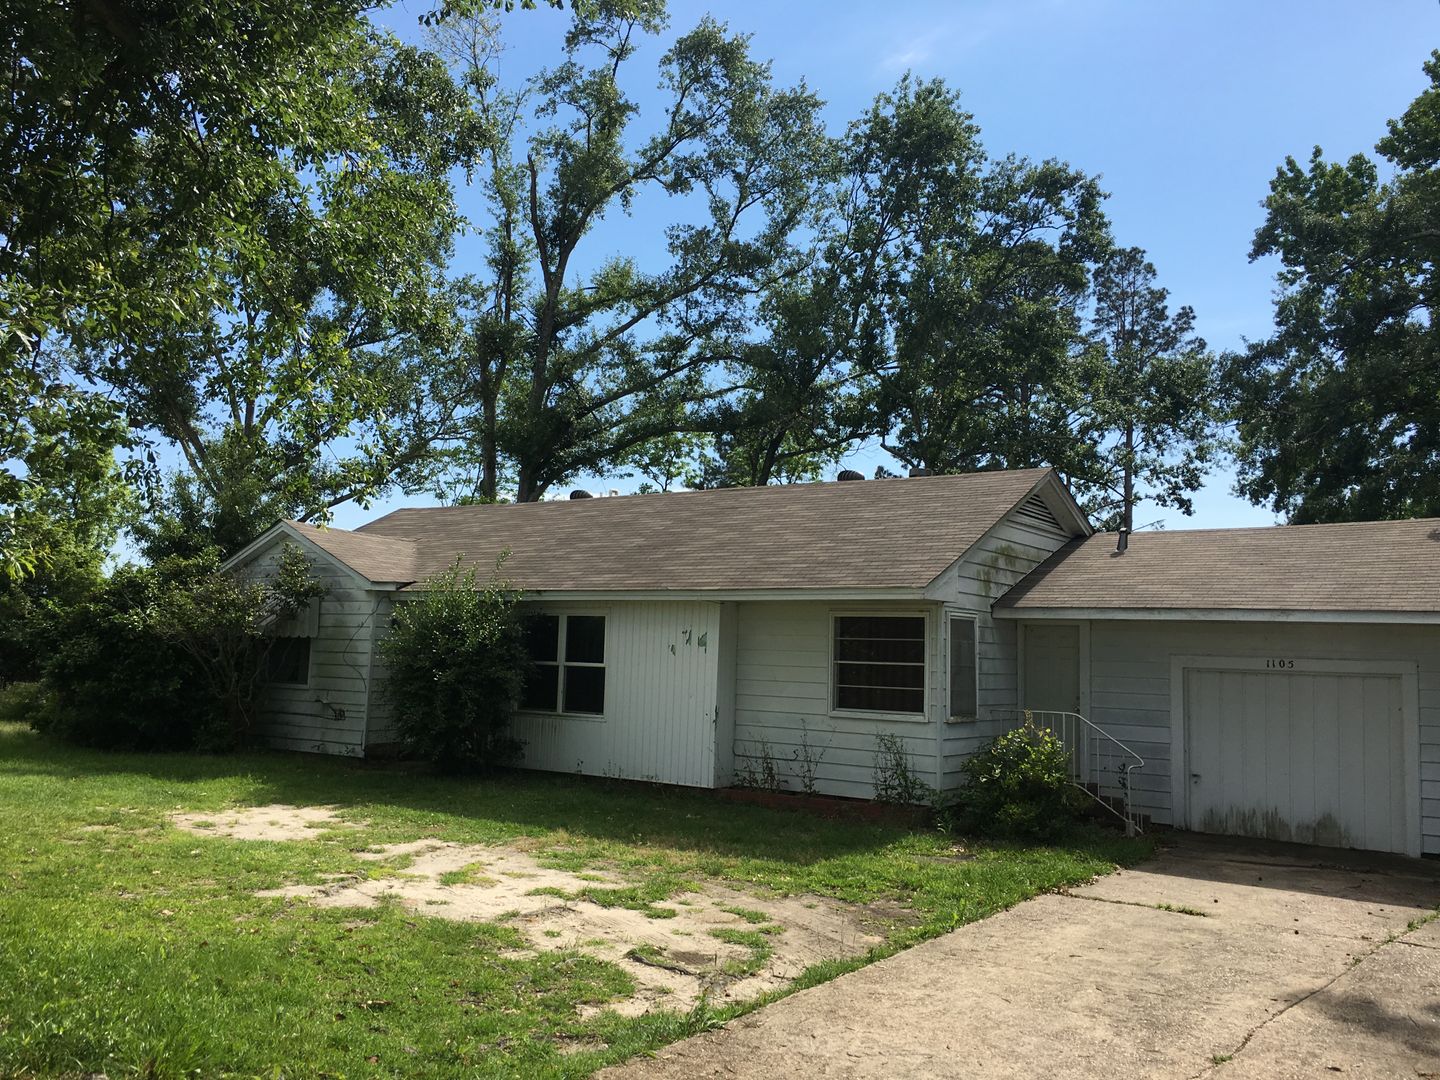 4 Bed 2 Bath - Secluded at I-20 & Hwy 167